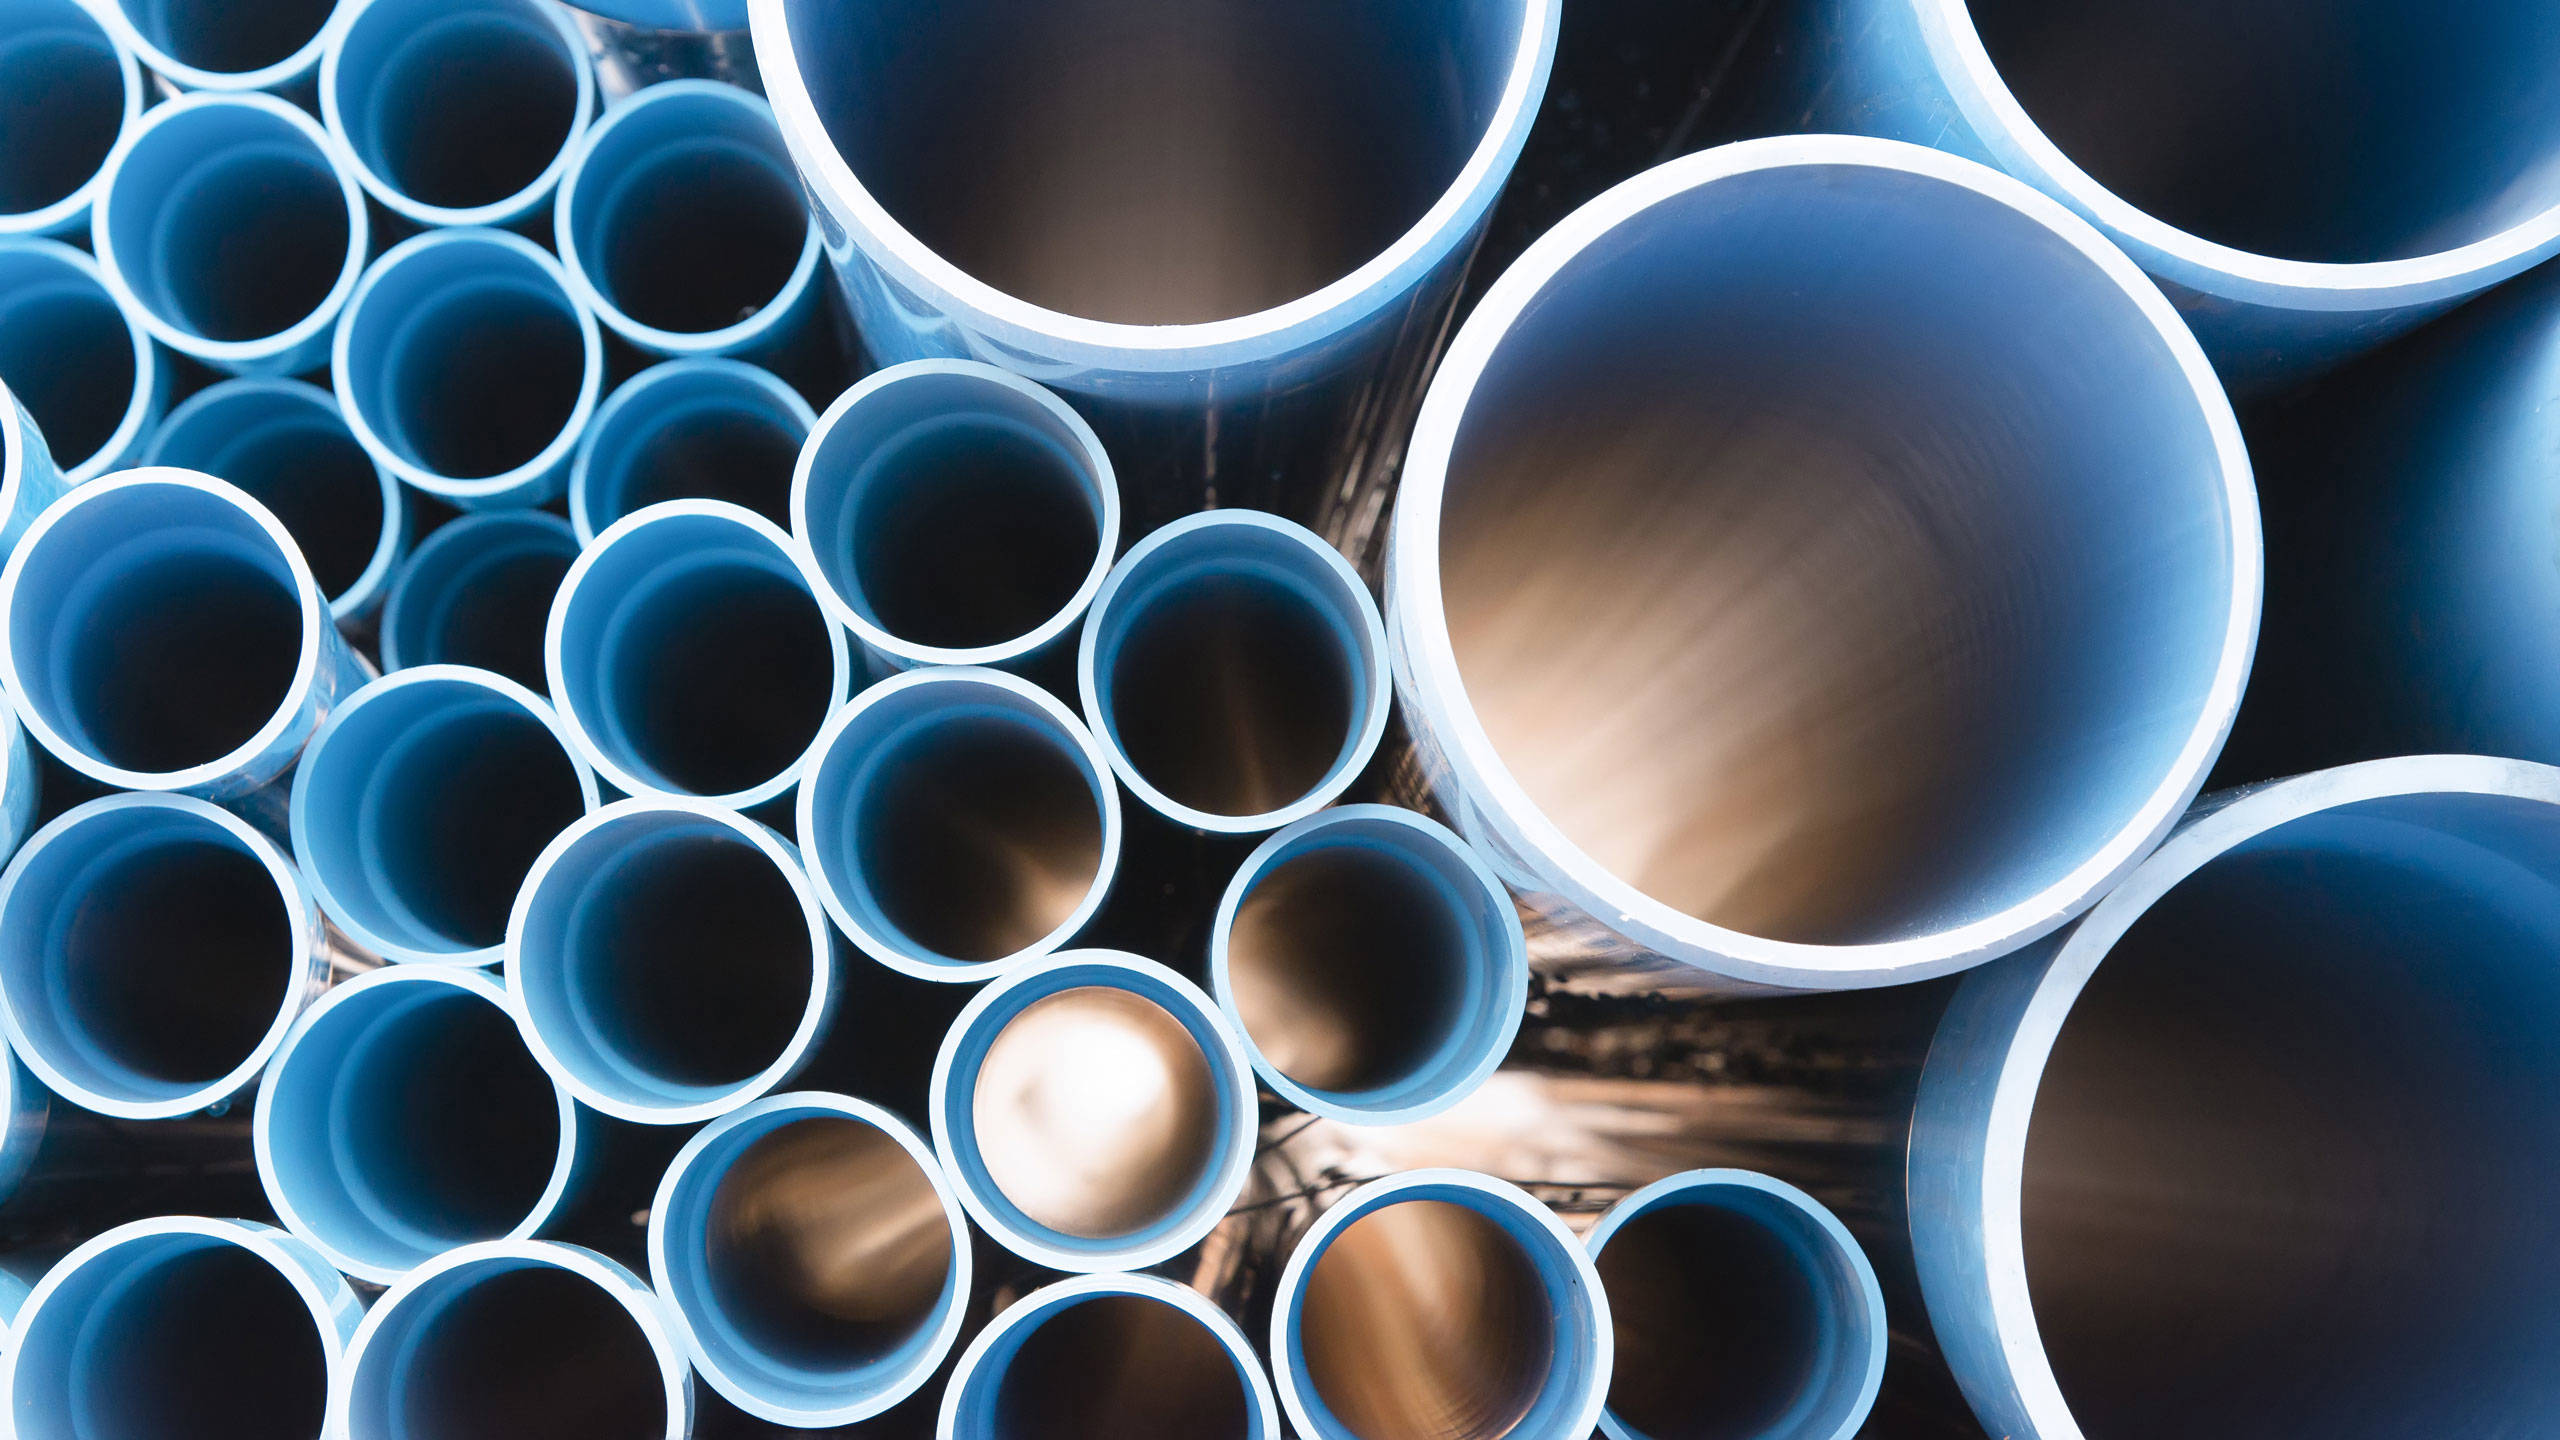 Water pipes stacked in a pile